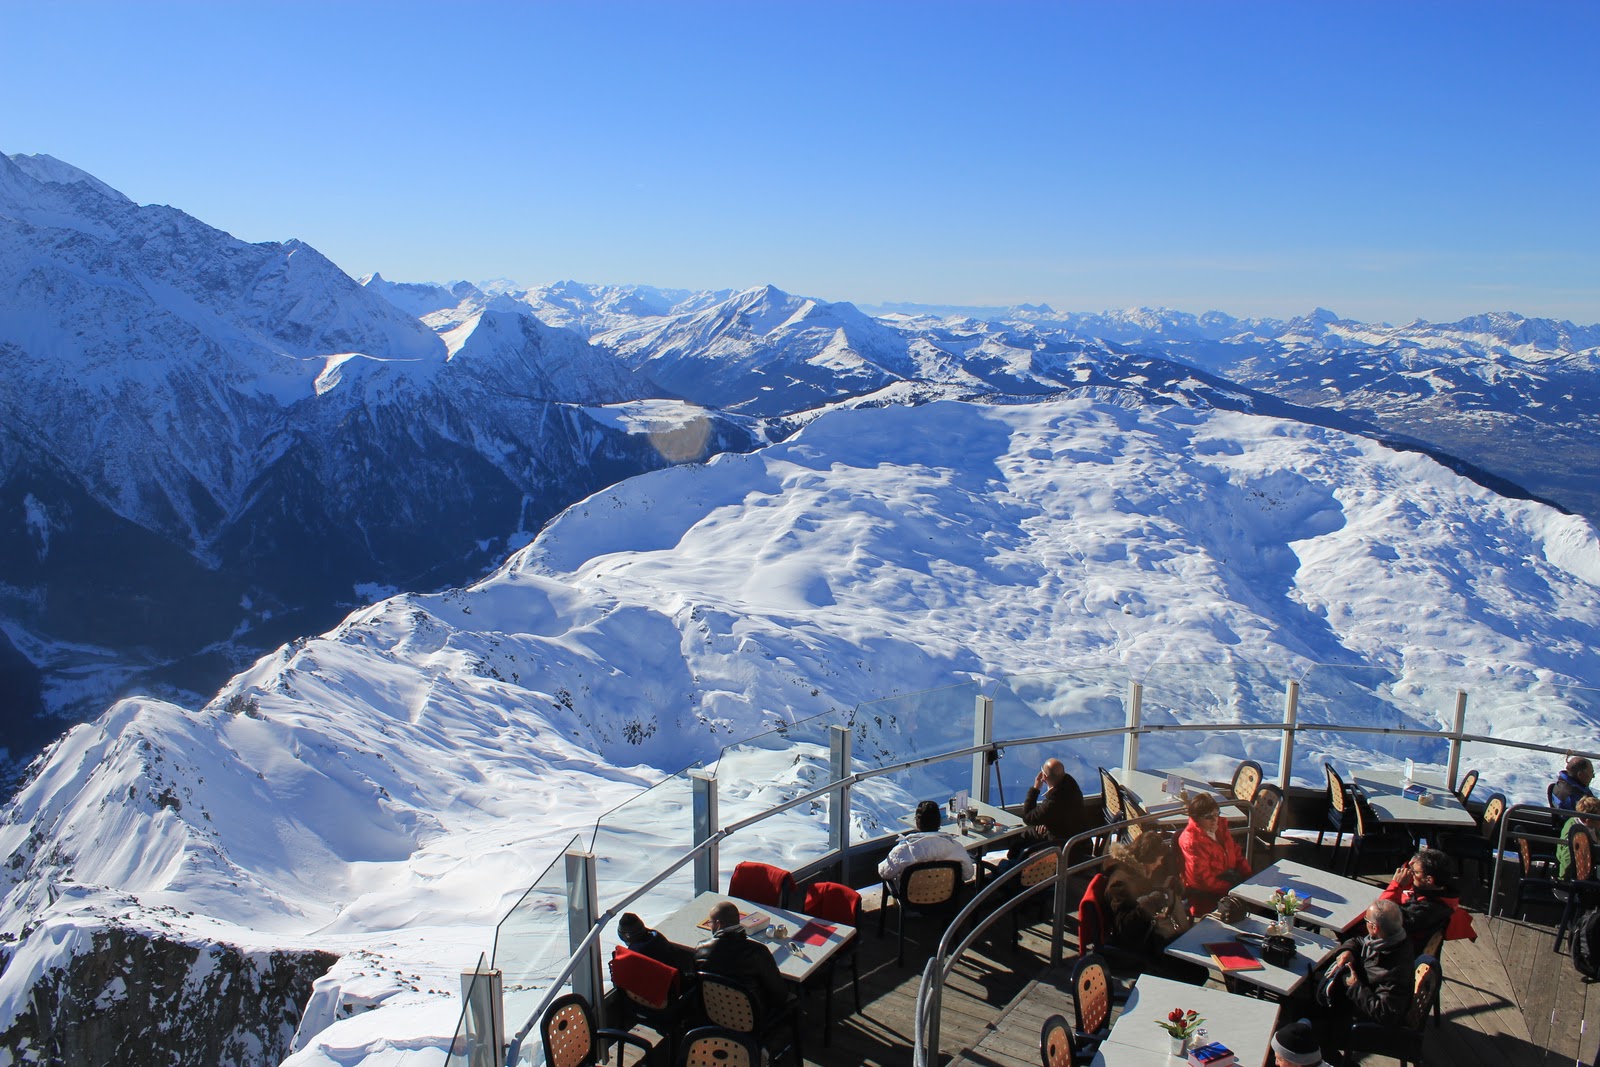 Le Panoramic at Le Brévent. The Must-Read Guide to Chamonix.